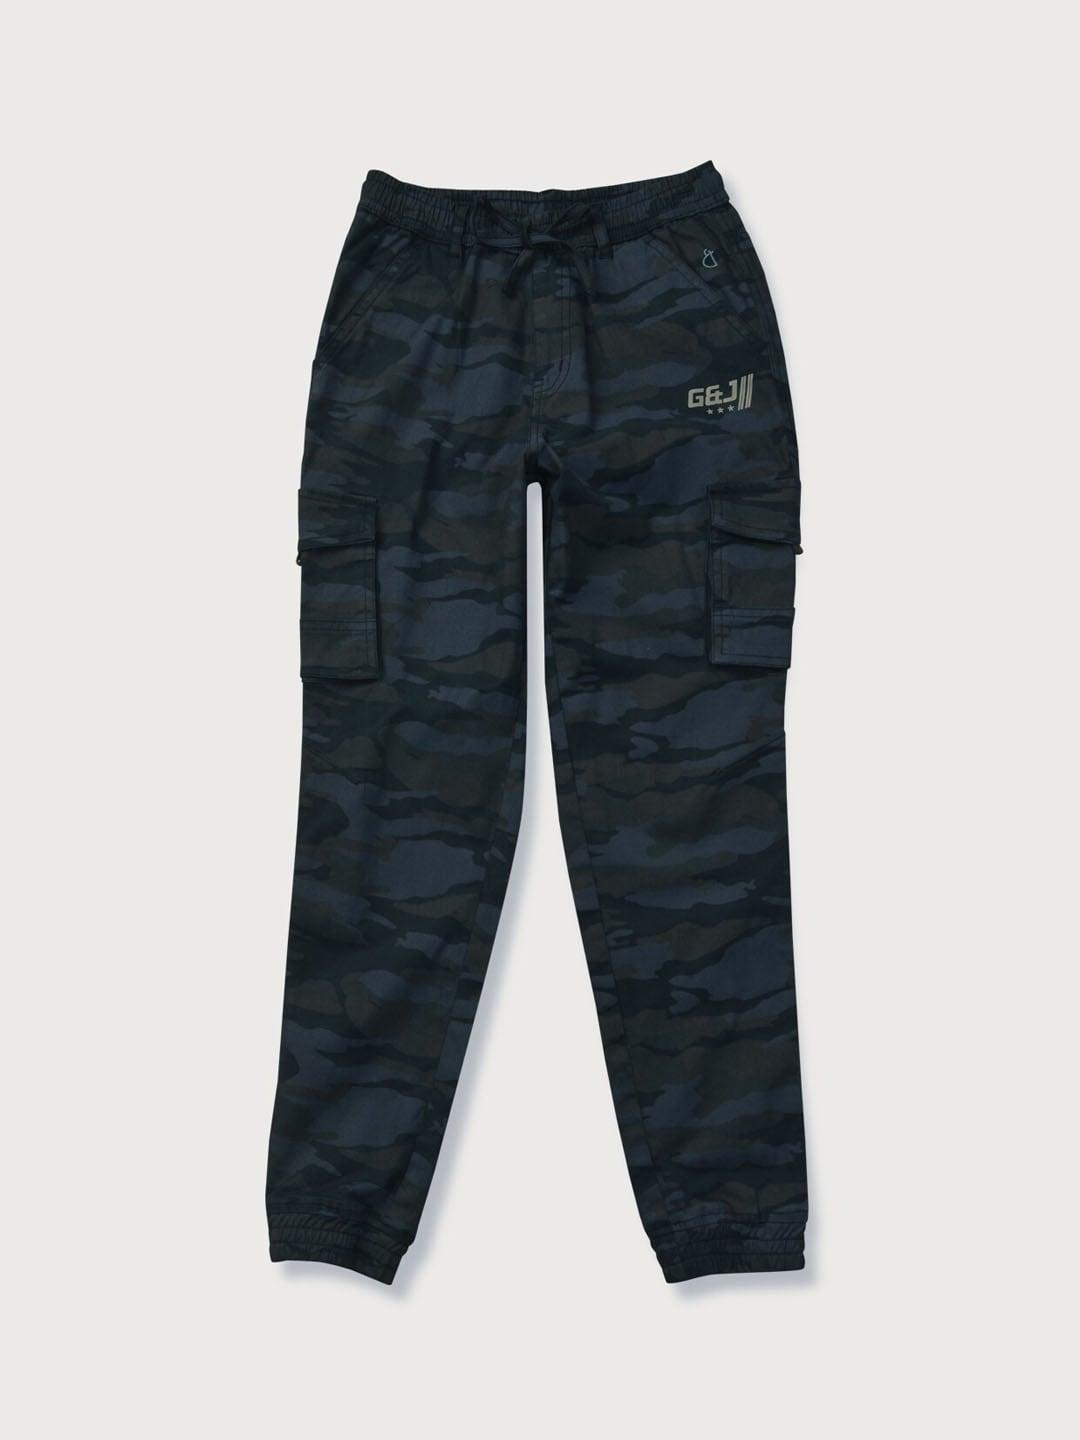 Gini and Jony Boys Navy Blue Camouflage Printed Cargos Trousers